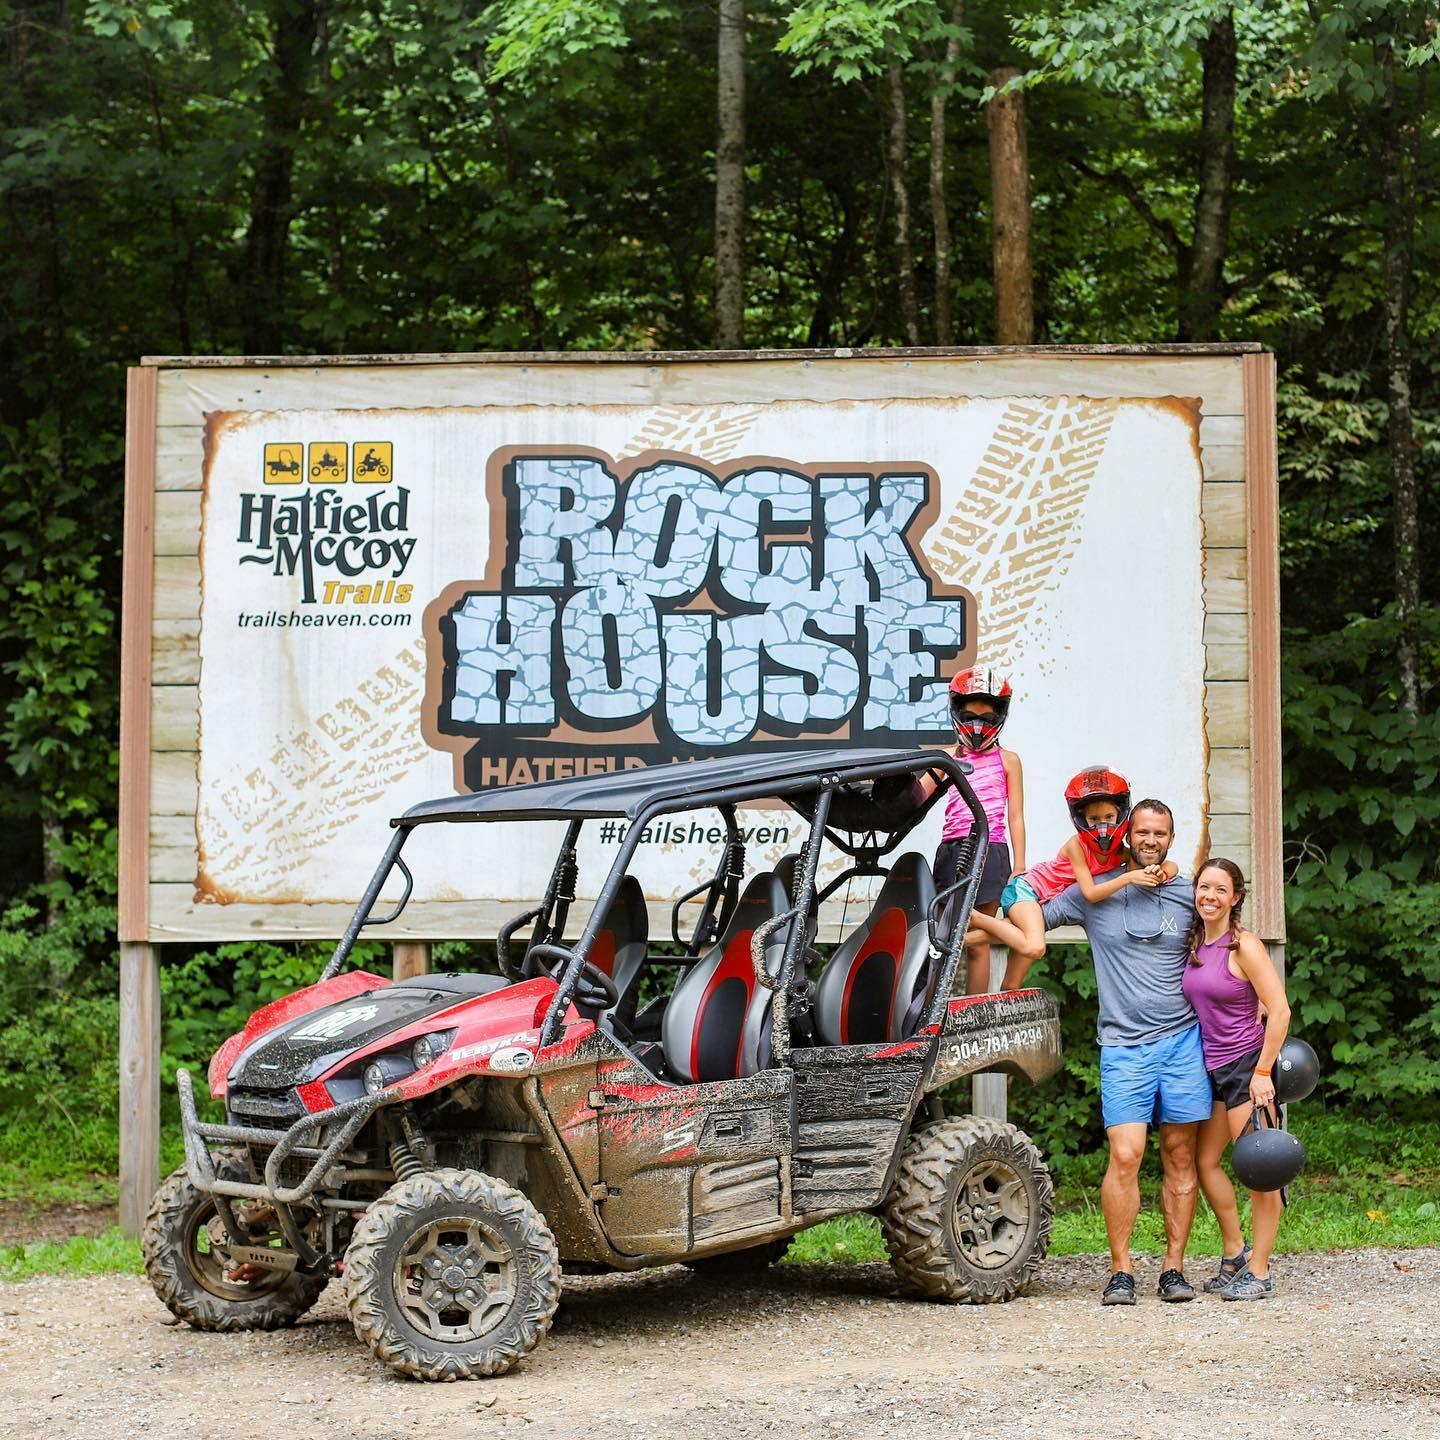 New family adventure? Sign me up! We had the *best* time exploring the Hatfield McCoy trail system in an ATV from @baccountry in West Virginia this past weekend!

We were hosted by @appalachianoutpost and @WVTourism in a great cabin conveniently located right next to the Rock House Trail entrance in Lyburn, West Virginia.

The girls and I were a bundle of nerves at the beginning but by lunch we were all laughing and screeching “Let ‘er rip!!” as we splashed through puddles and bounced over bumps. Talk about exhilarating family fun!

If you haven’t been on the trails of West Virginia, motorsport-style, I highly recommend it; the girls are already asking when we can go again! 

#partner #almostheaven